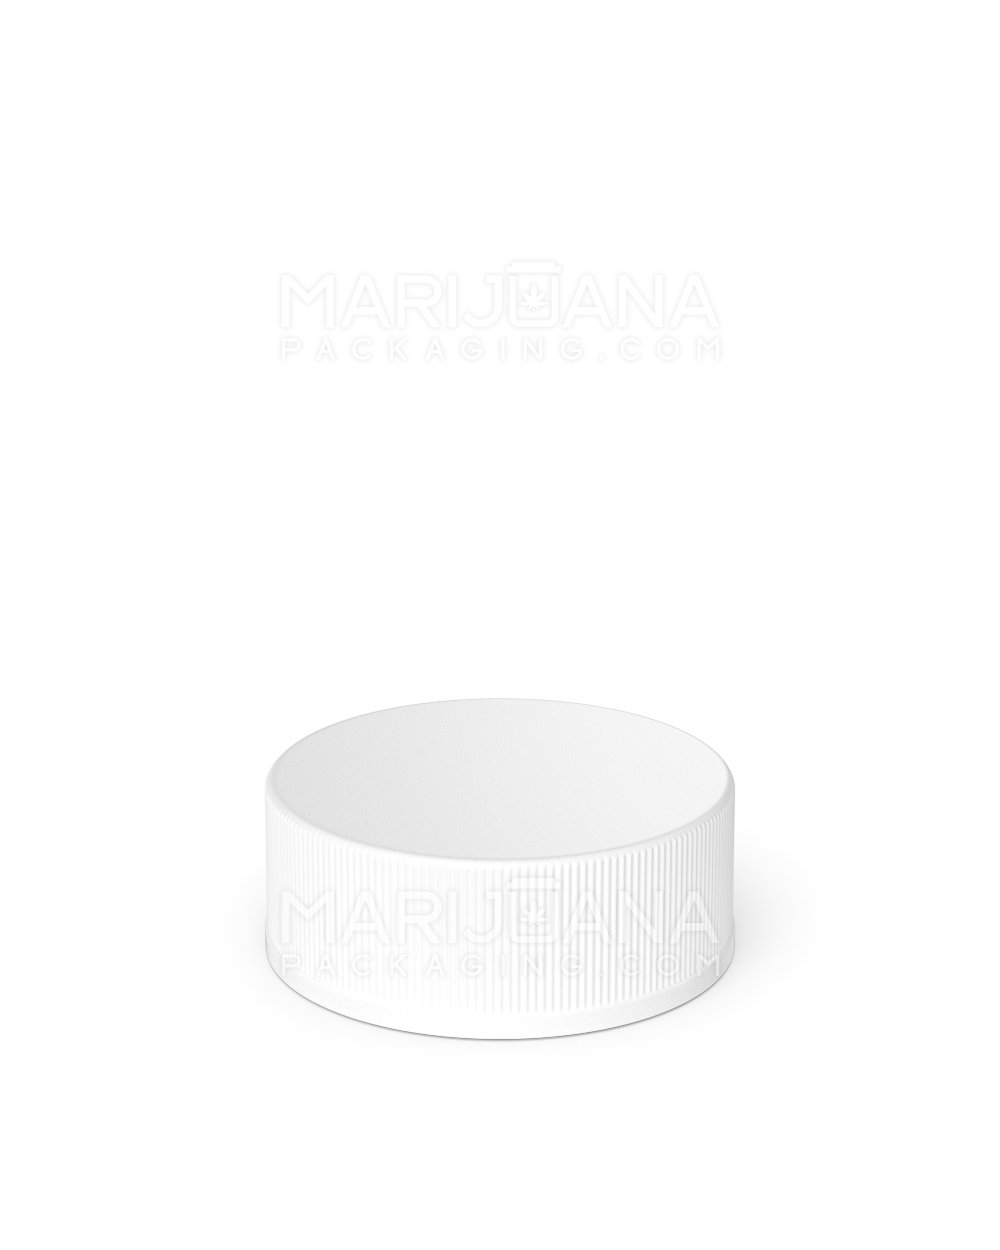 Child Resistant | Ribbed Push Down and Turn Plastic Caps w/ Foil Liner | 38mm - Semi Gloss White - 320 Count - 3